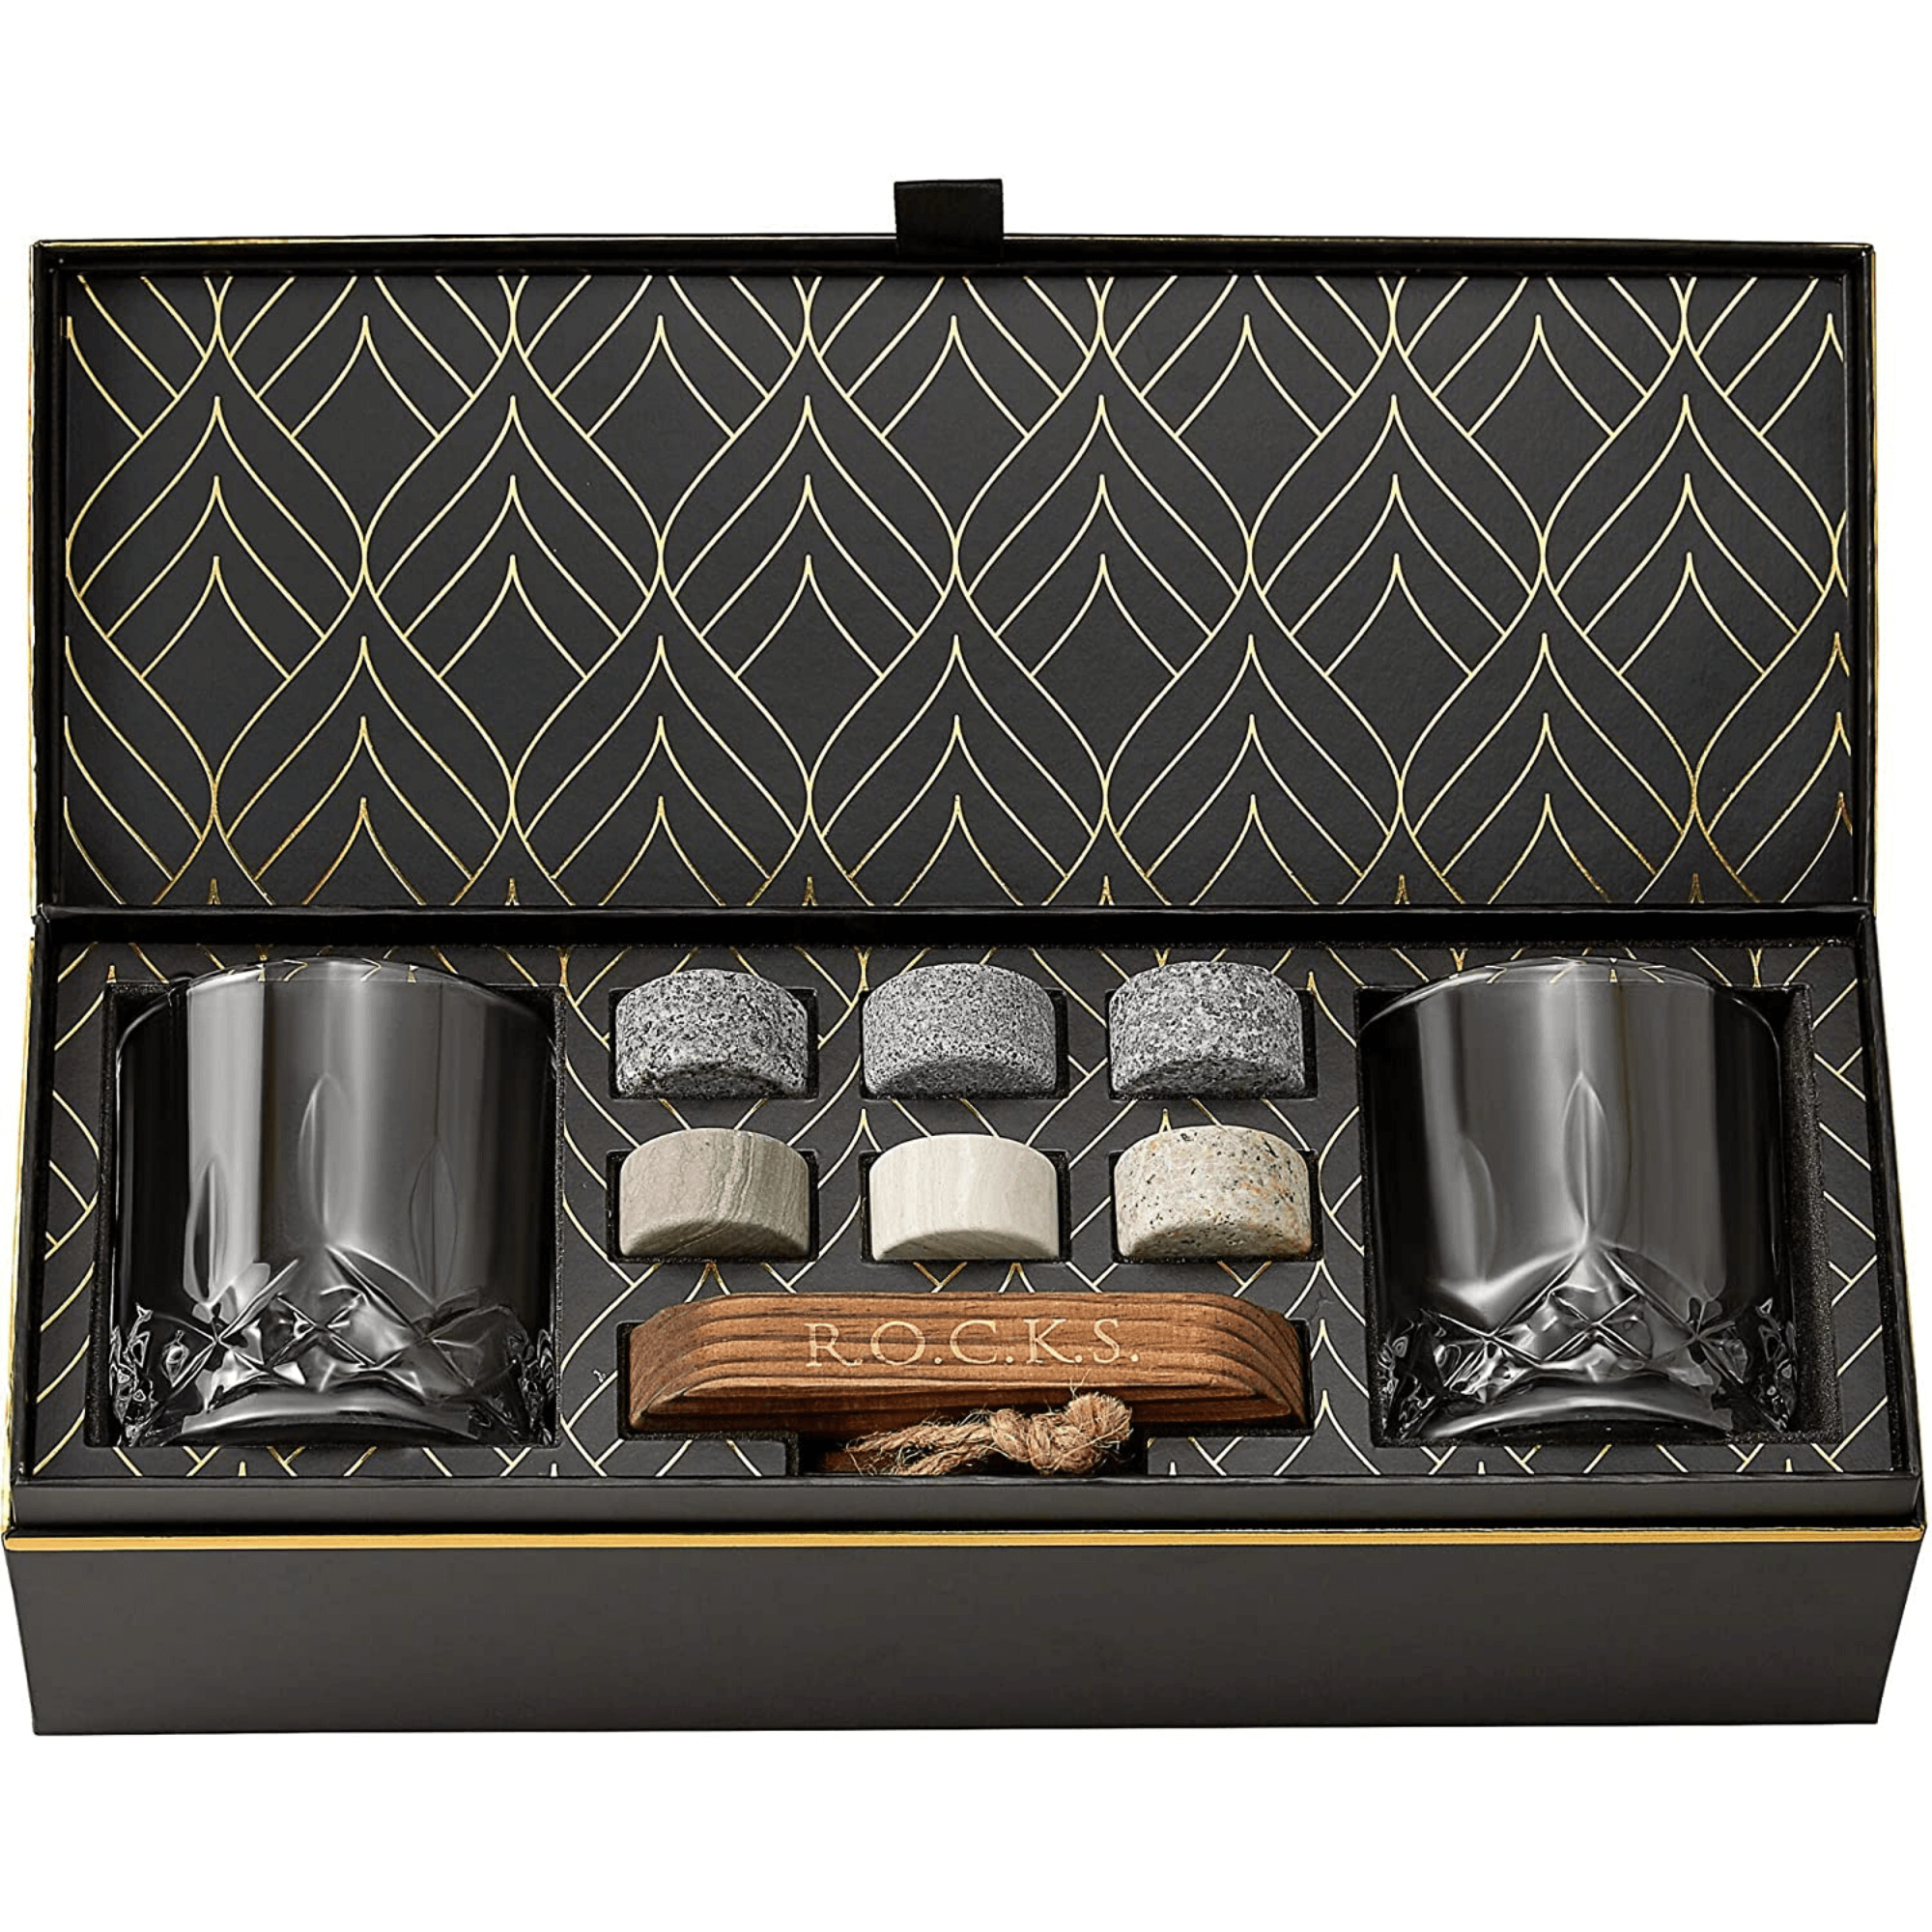 The Connoisseur's Set - Signature Glass Edition by R.O.C.K.S. Whiskey Chilling Stones